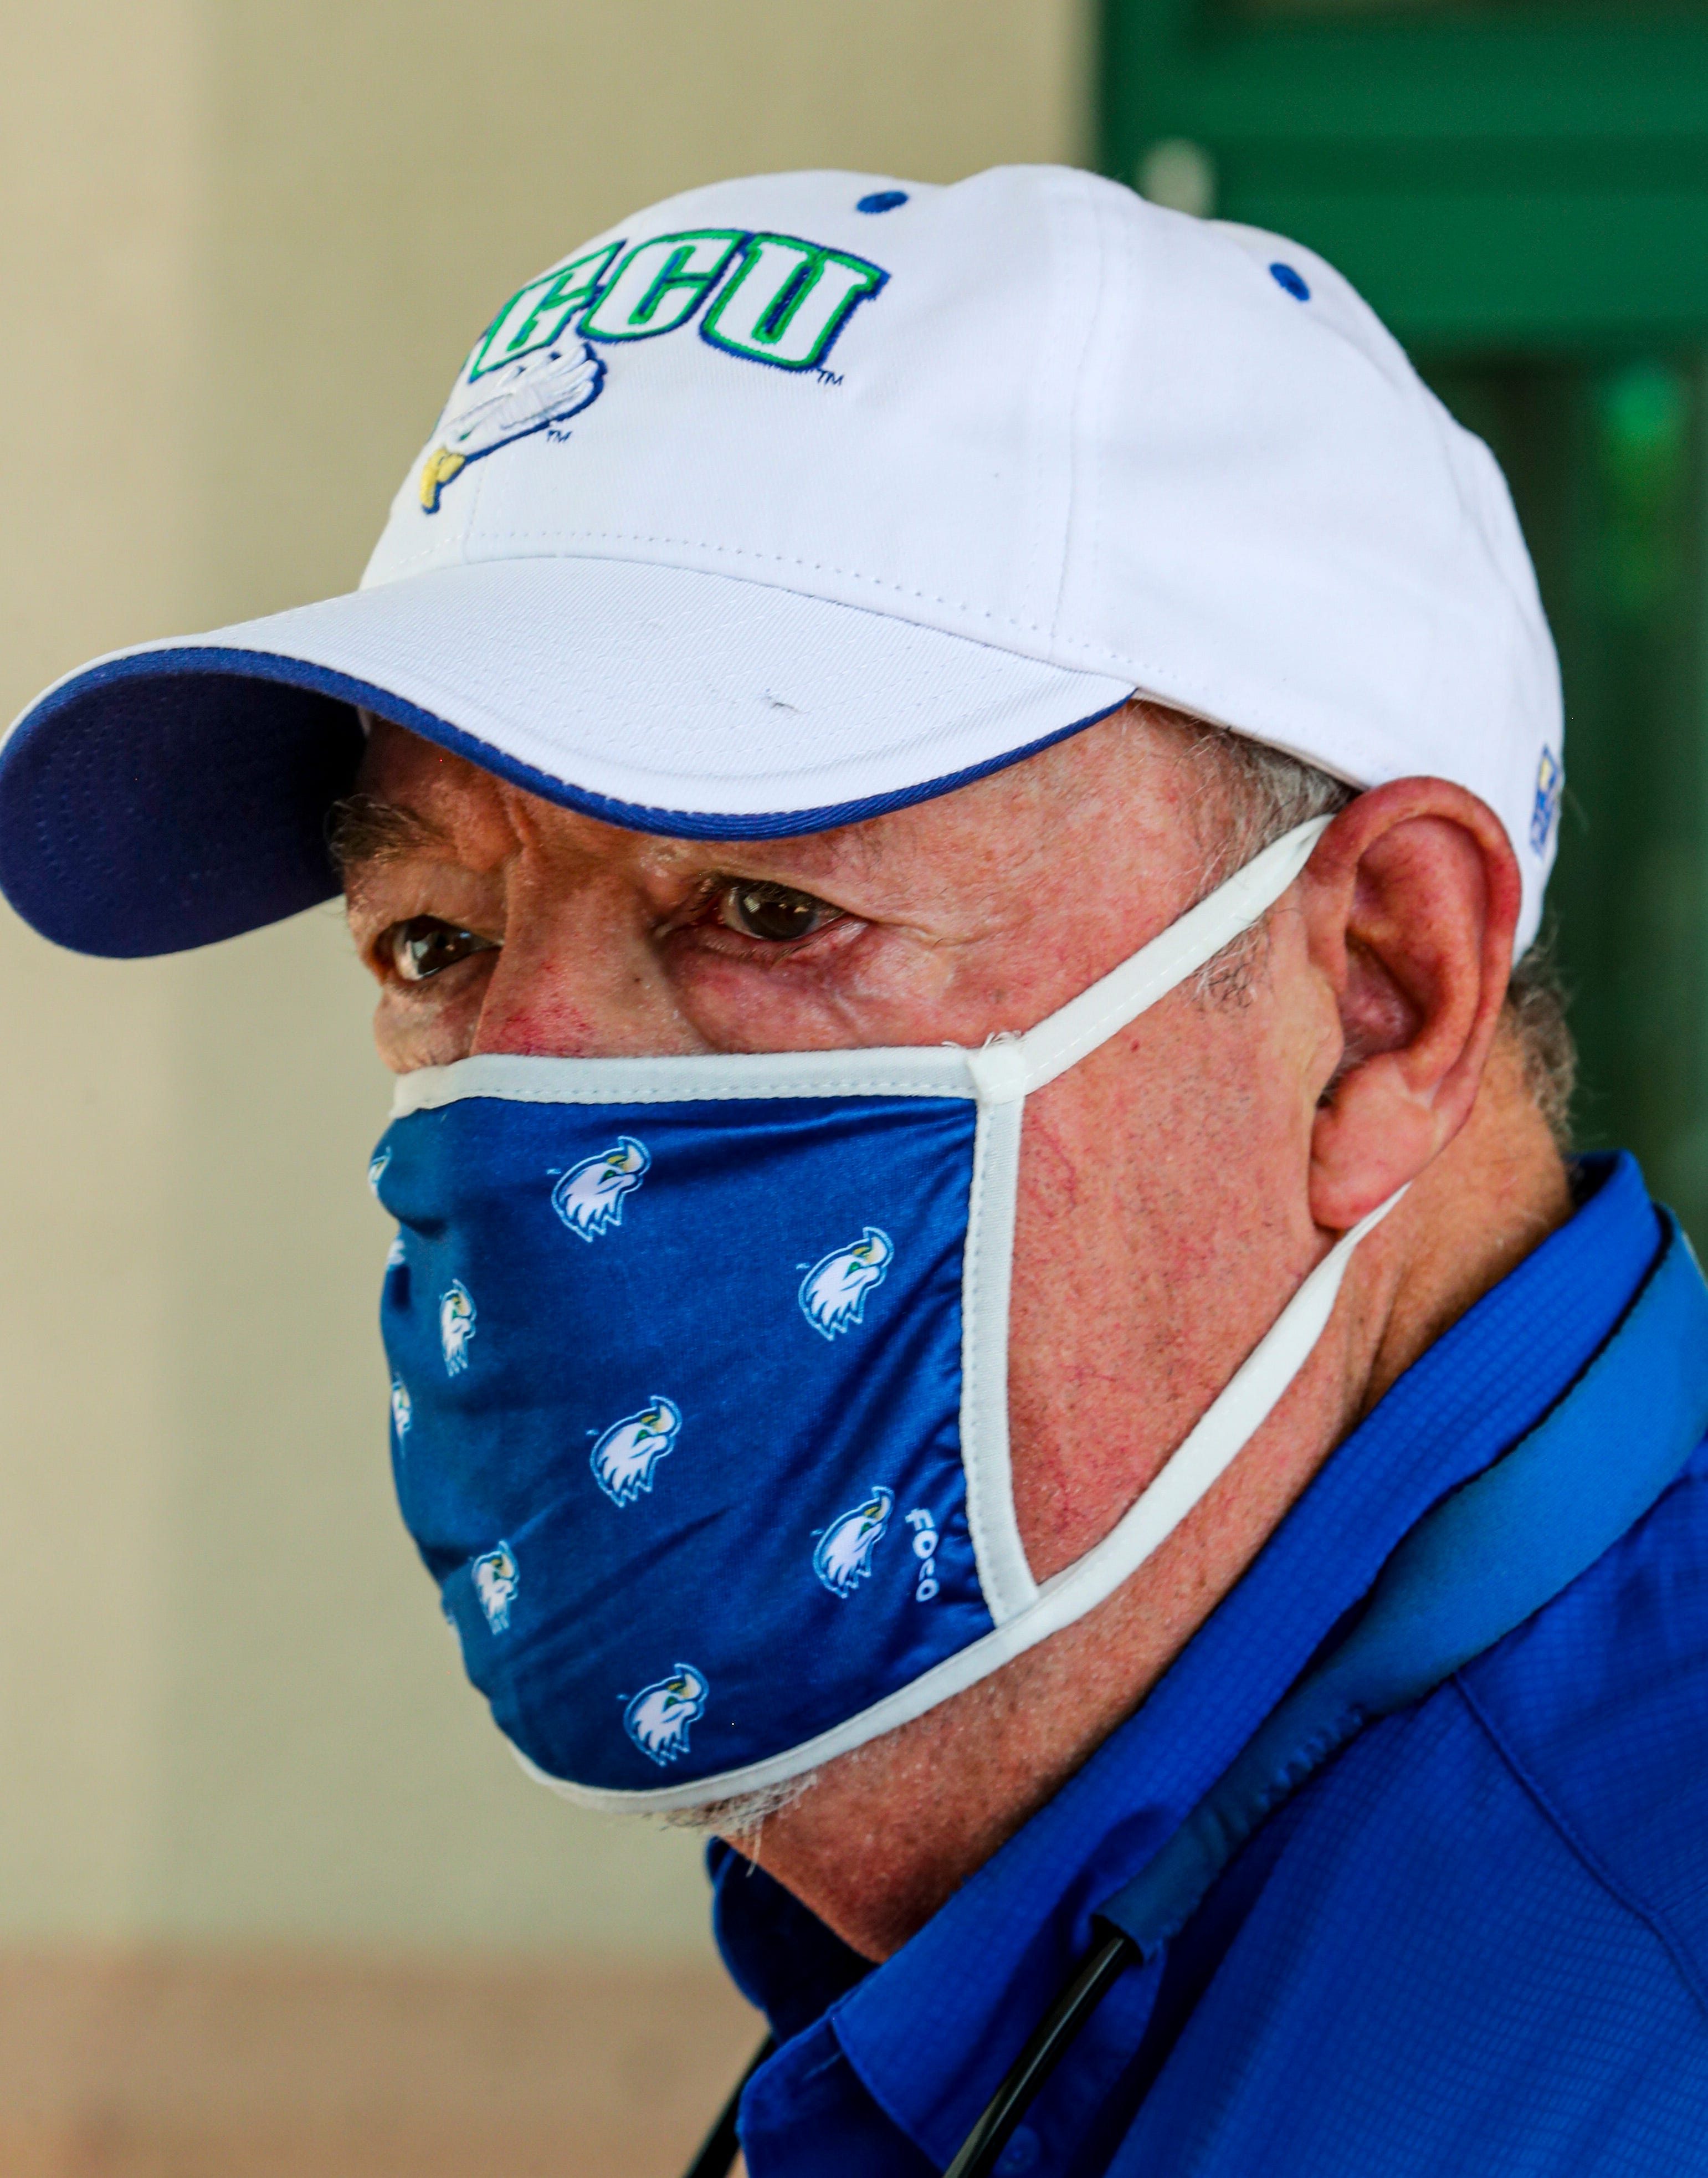 Mike Martin, president of FGCU, make sure his mask is on when interacting with anyone on campus. Fall semester at FGCU has begun with highlights on students moving in to campus dorms, the changes being seen on campus safety wise and the budget realities for what's to come.